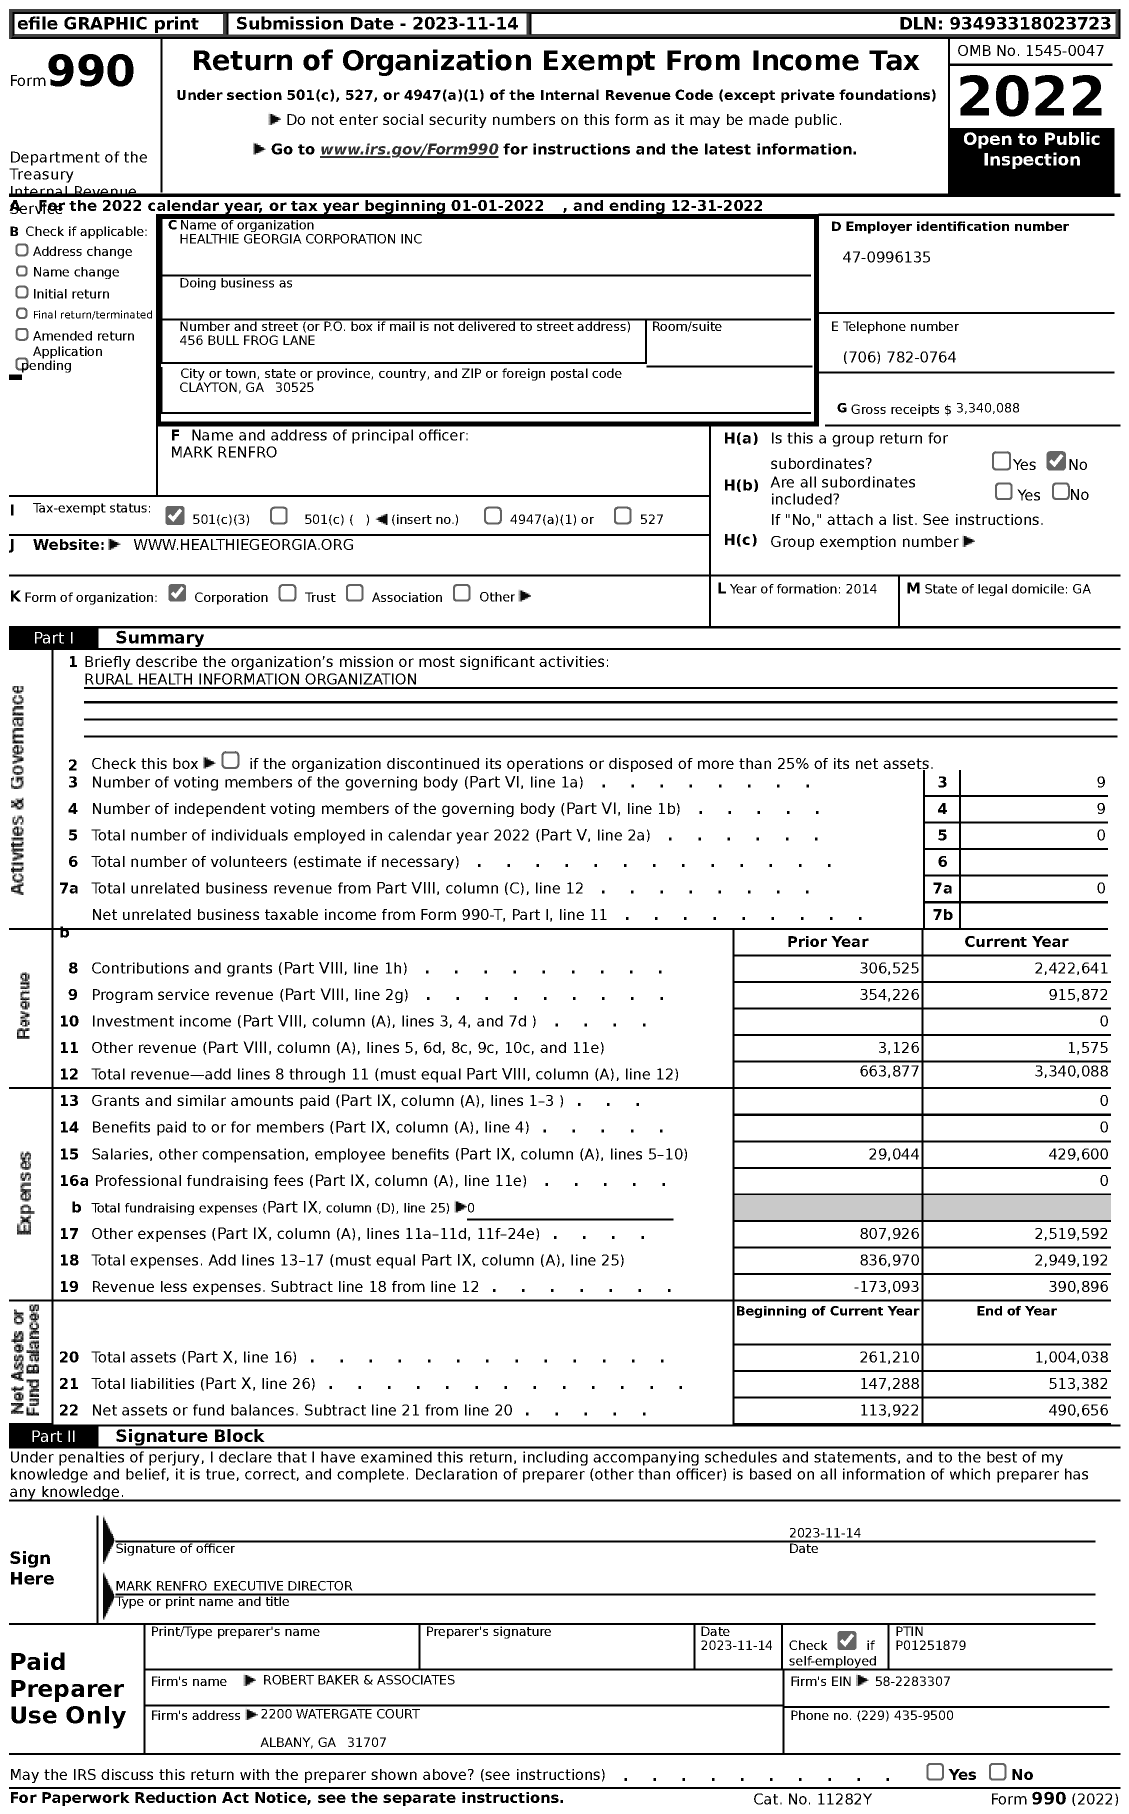 Image of first page of 2022 Form 990 for Healthie Georgia Corporation